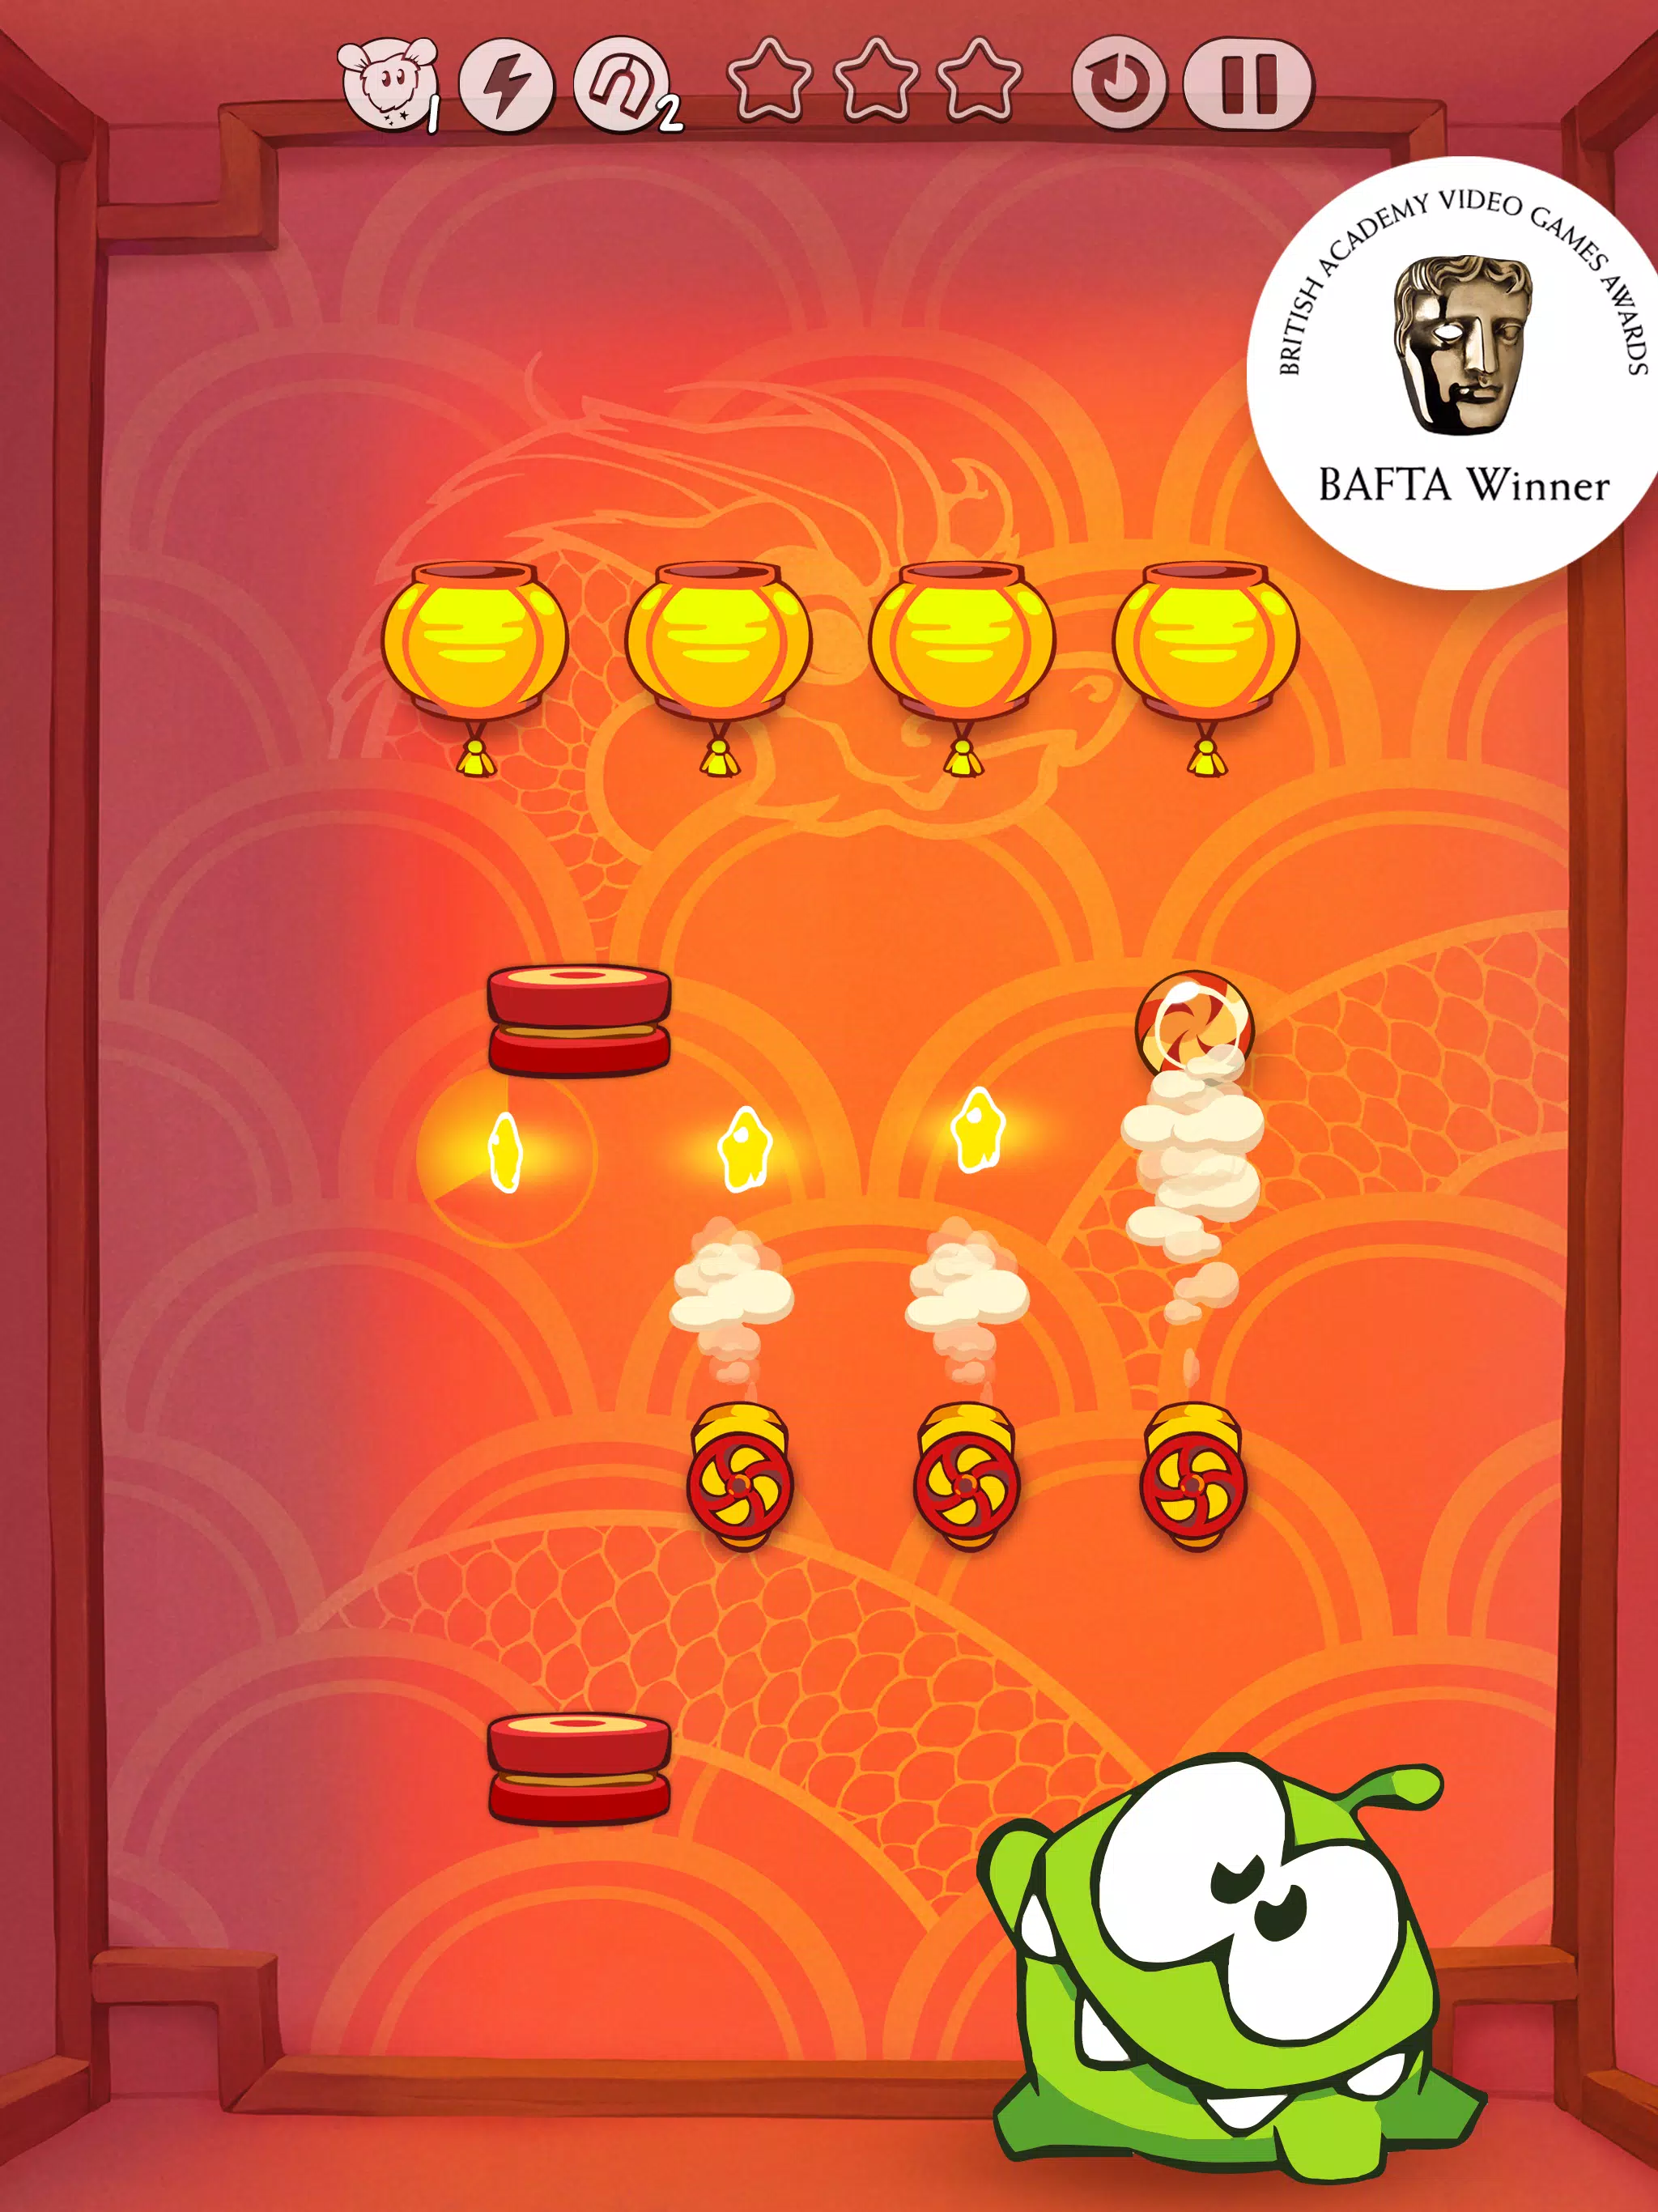 Cut the Rope Theme APK for Android Download